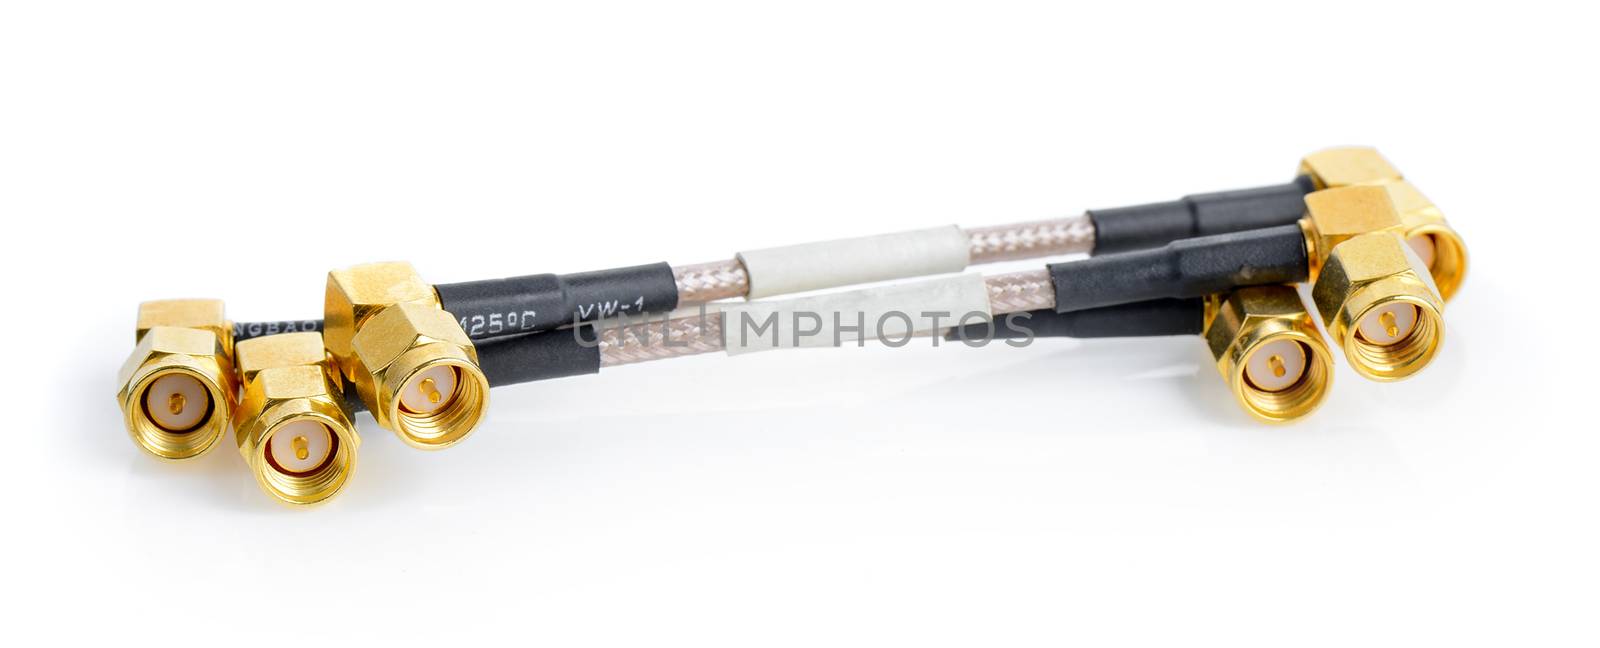 High-frequency SMA connectors isolated on white background. Gold plated pins.